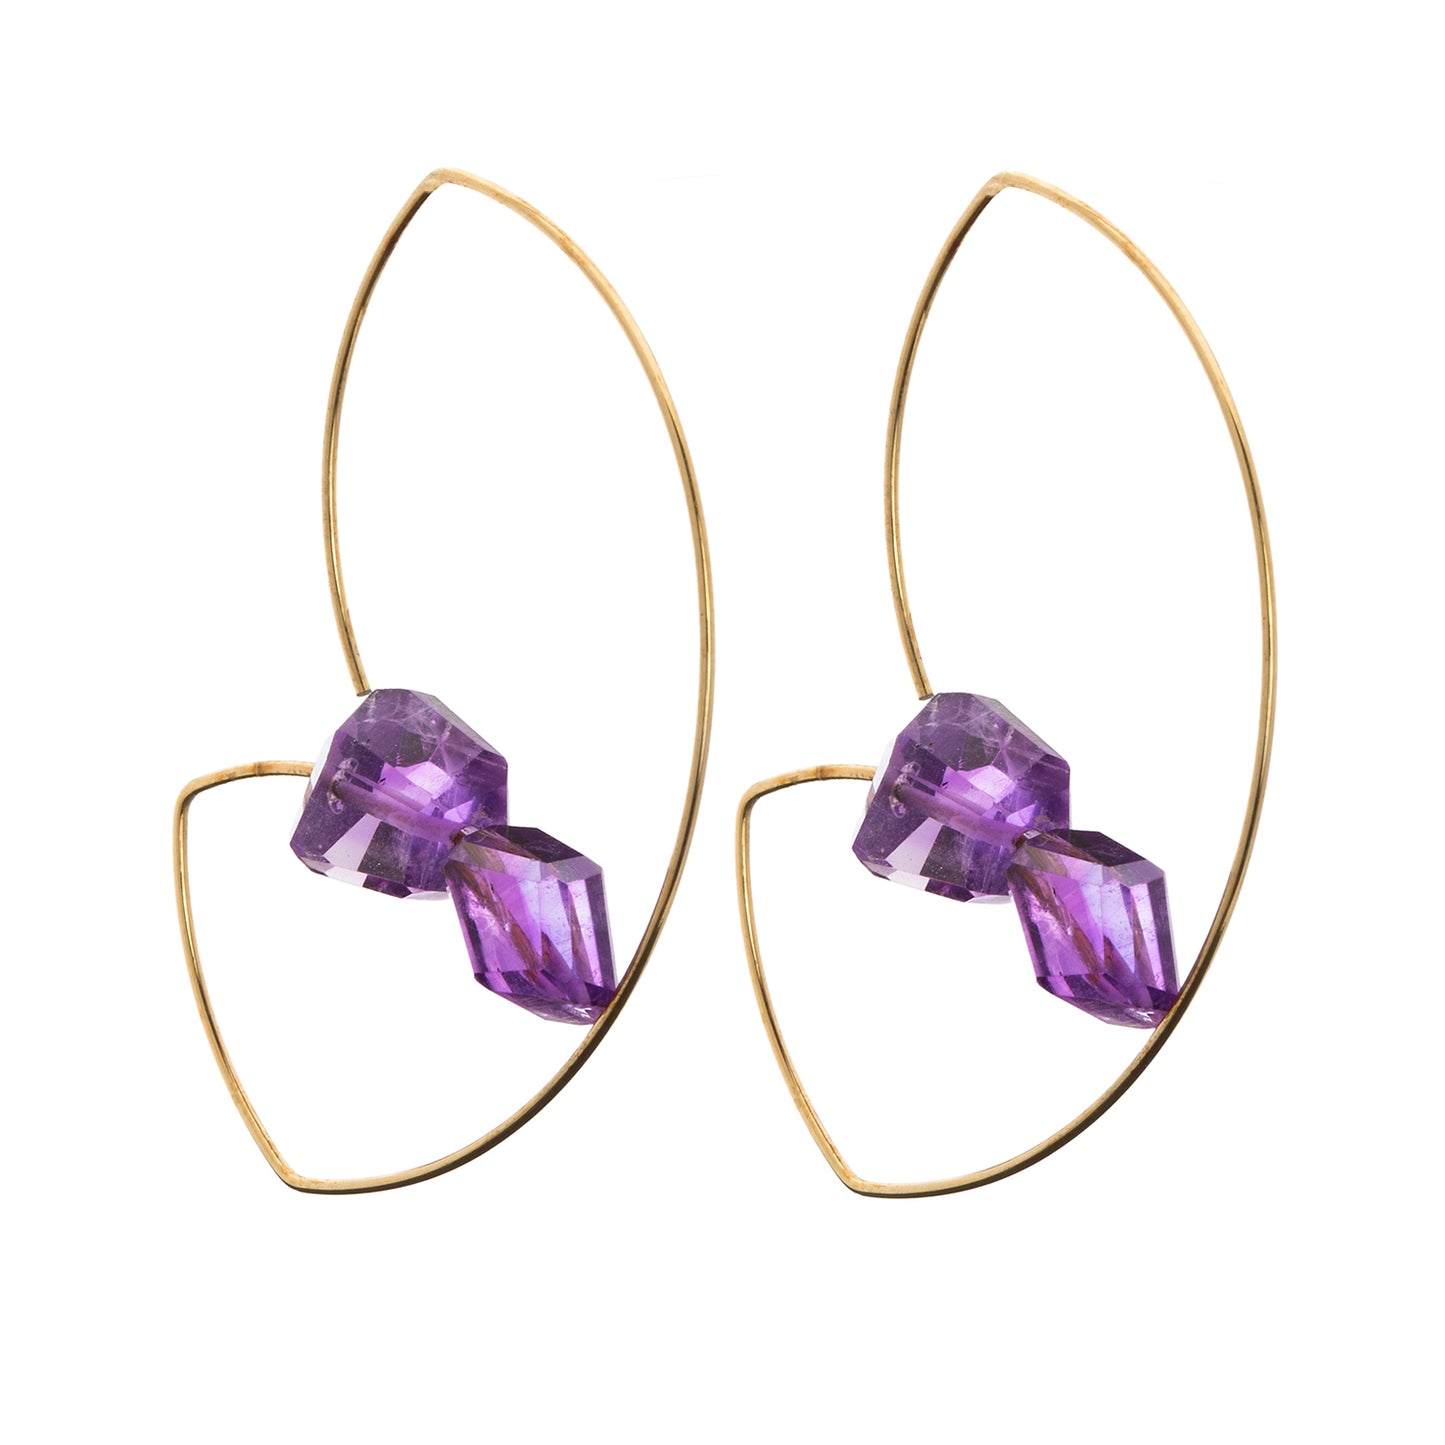 Angled Curve Earrings with Amethyst